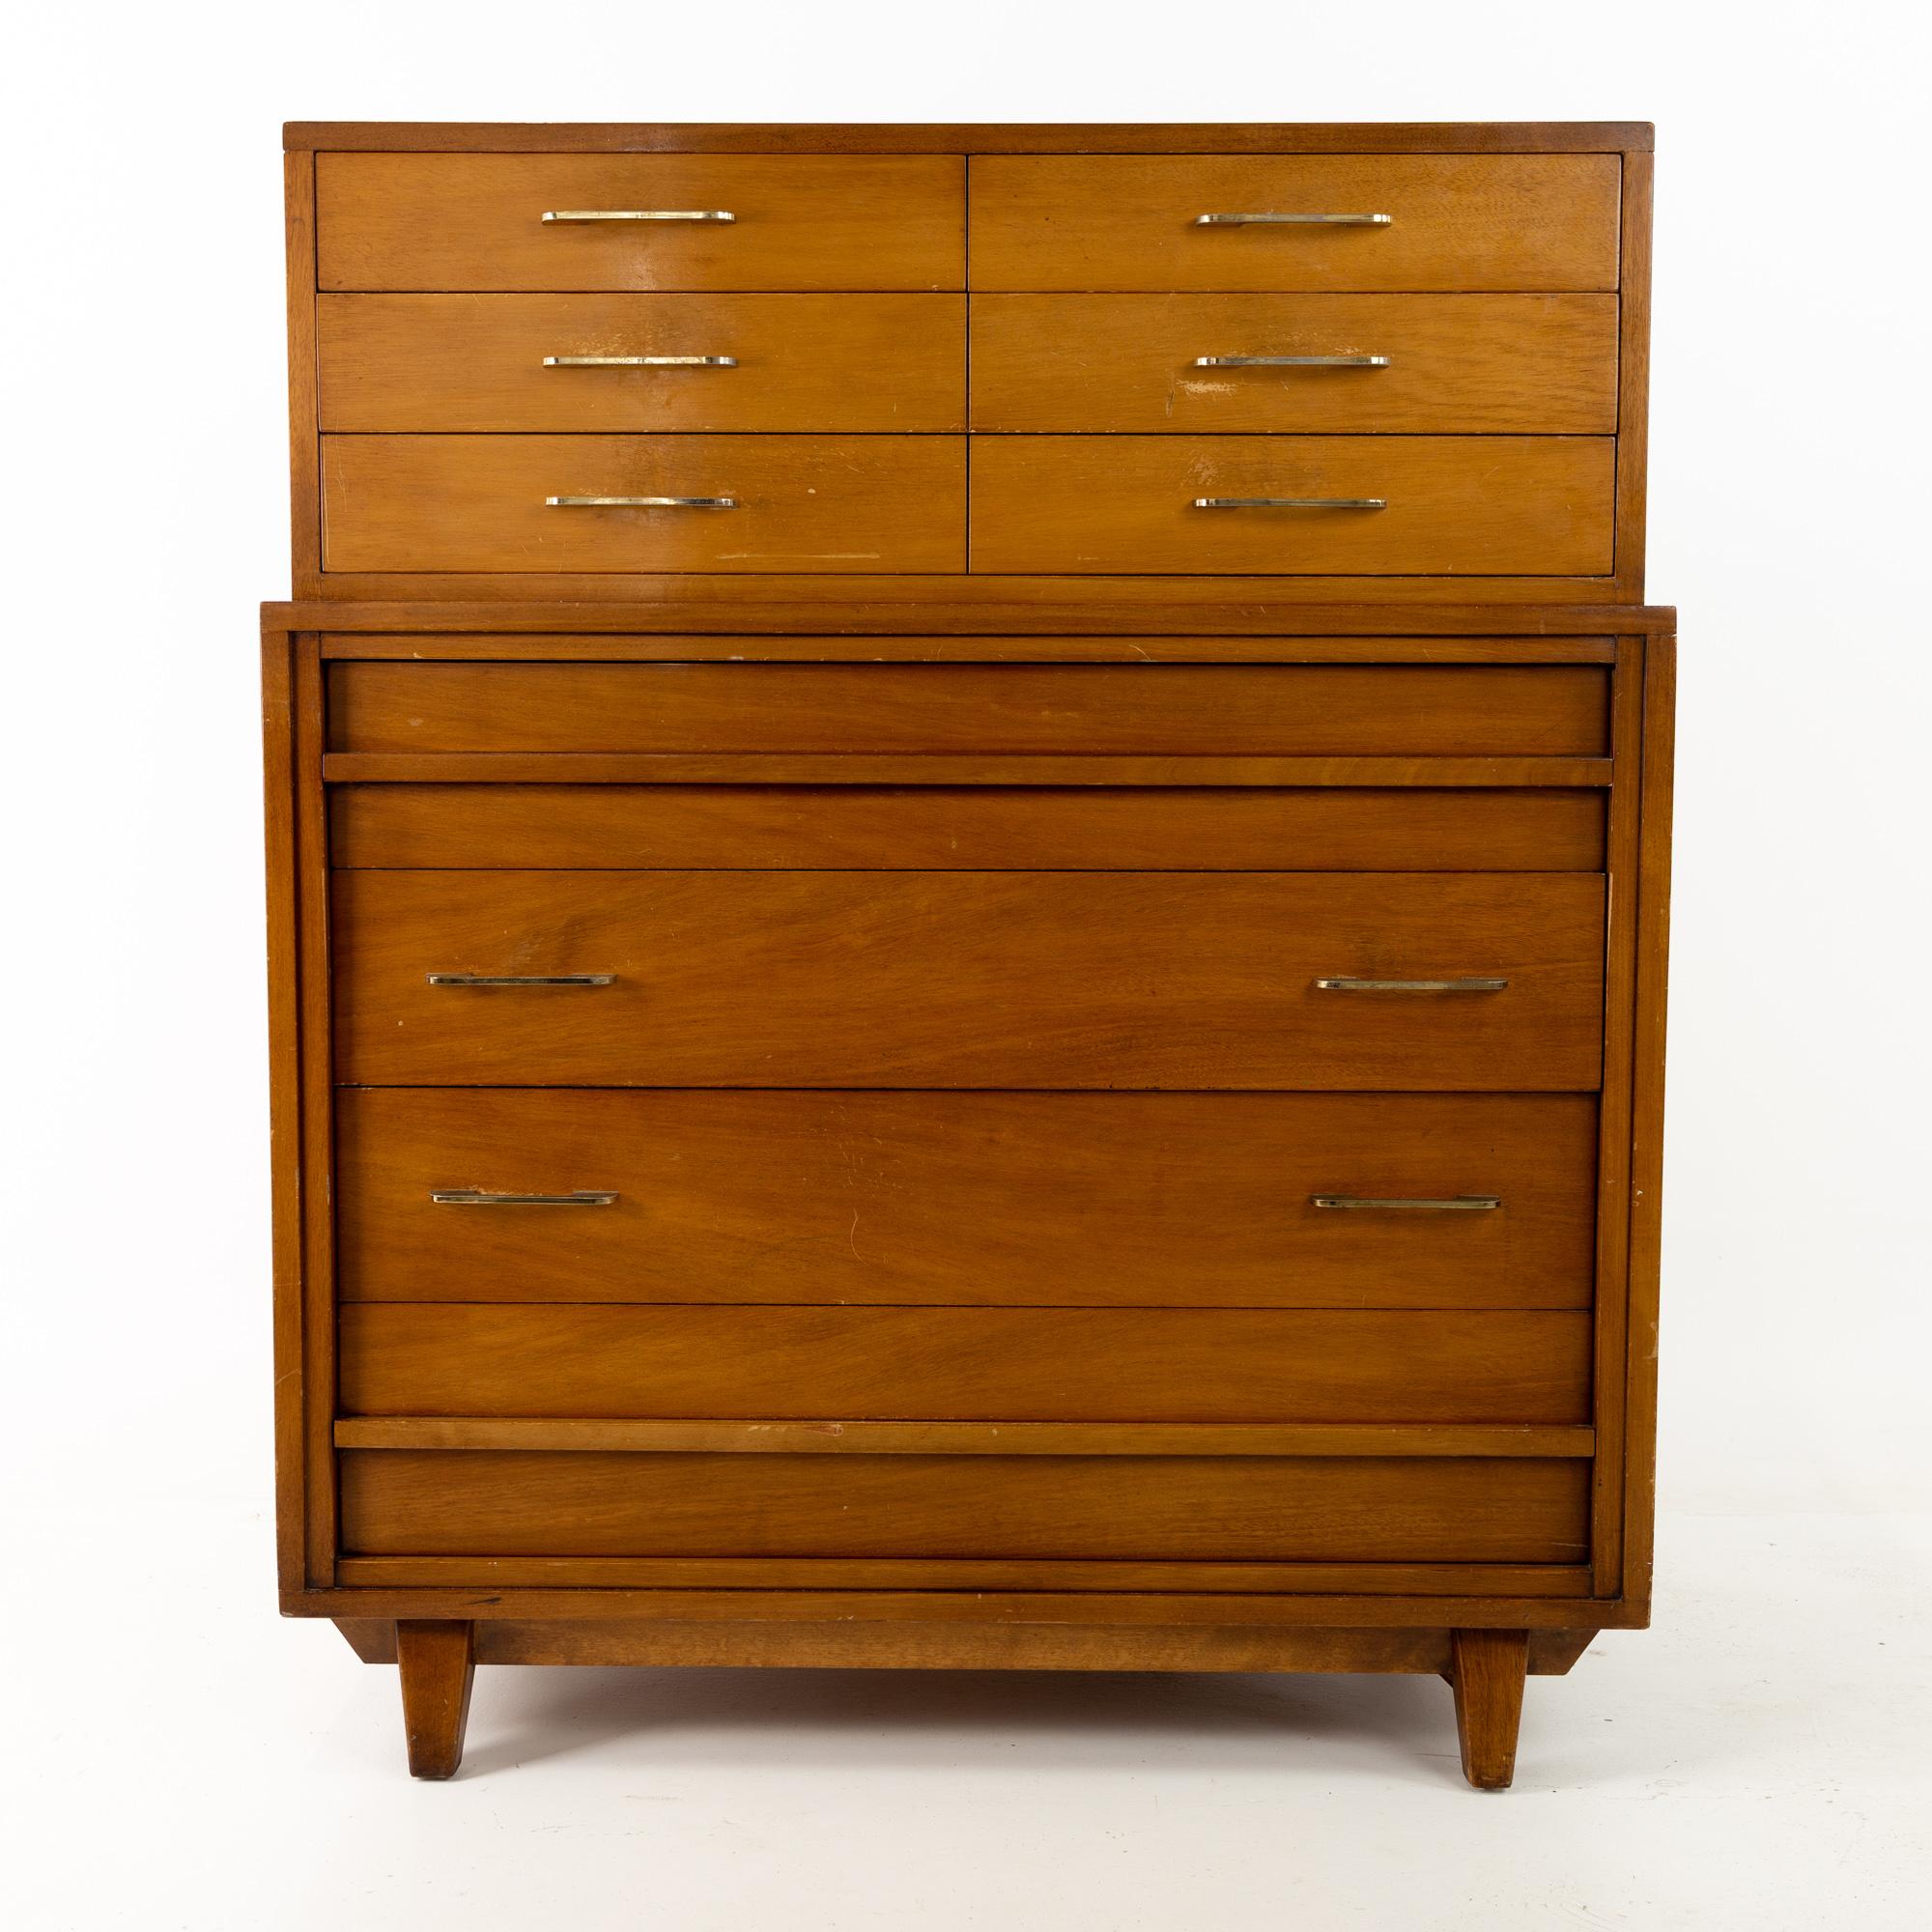 R-Way Mid Century honey walnut 7 drawer highboy dresser
This dresser is 37 wide x 20.5 deep x 46 inches high

This price includes getting this piece in what we call restored vintage condition. That means the piece is permanently fixed upon purchase